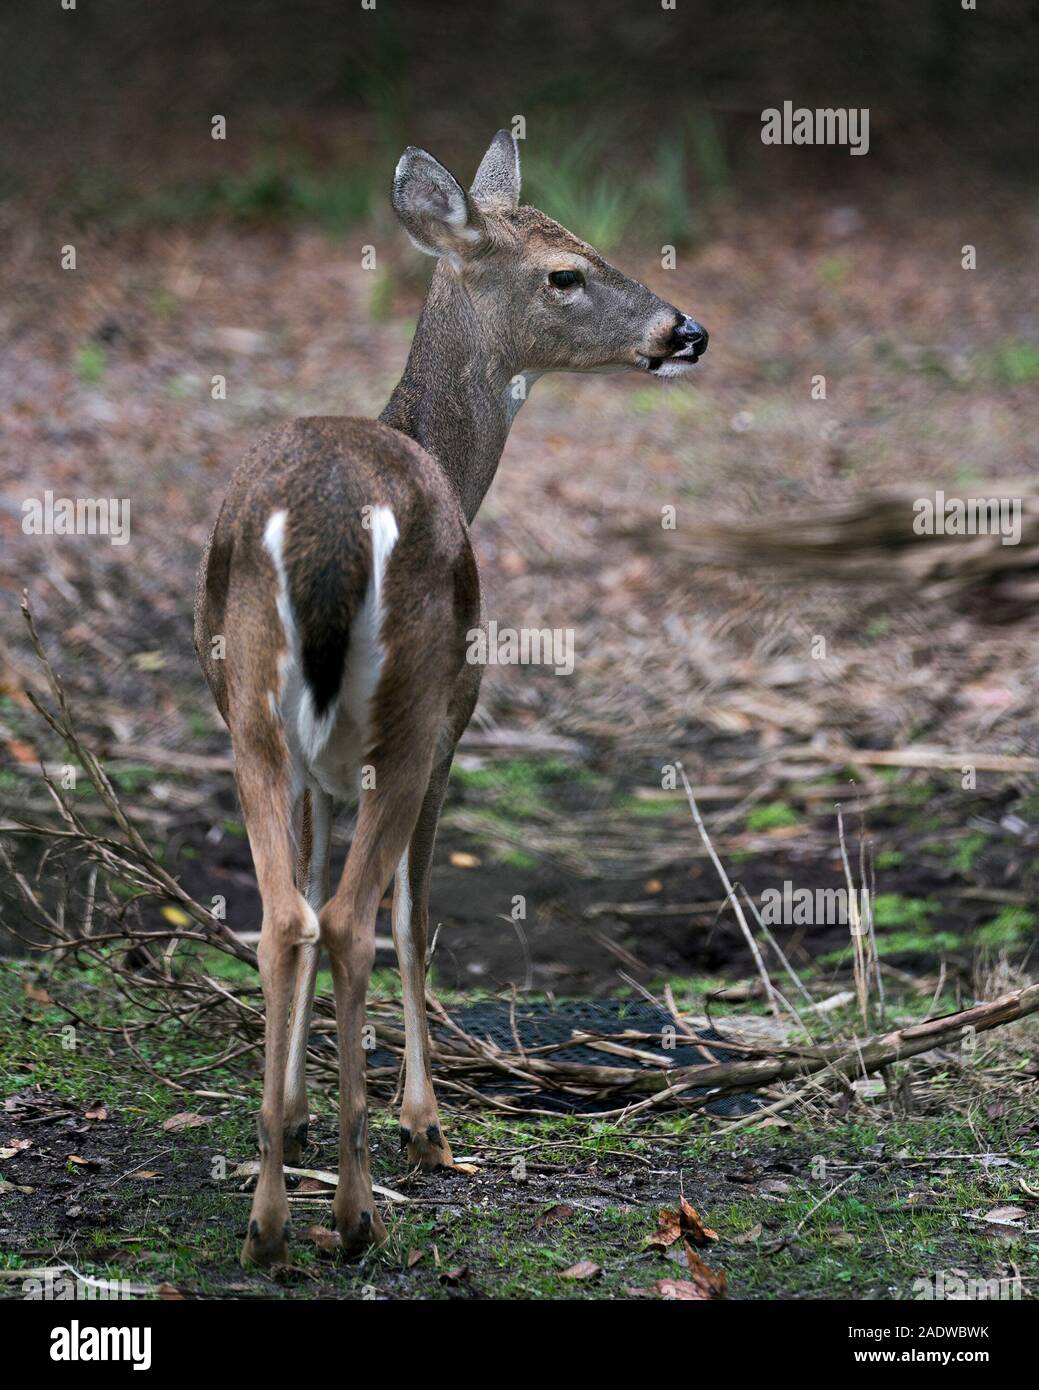 Deer animal White-tailed dear head close-up profile view with bokeh background exposing its head, ears, eye, mouth, nose, brown fur in its surrounding Stock Photo